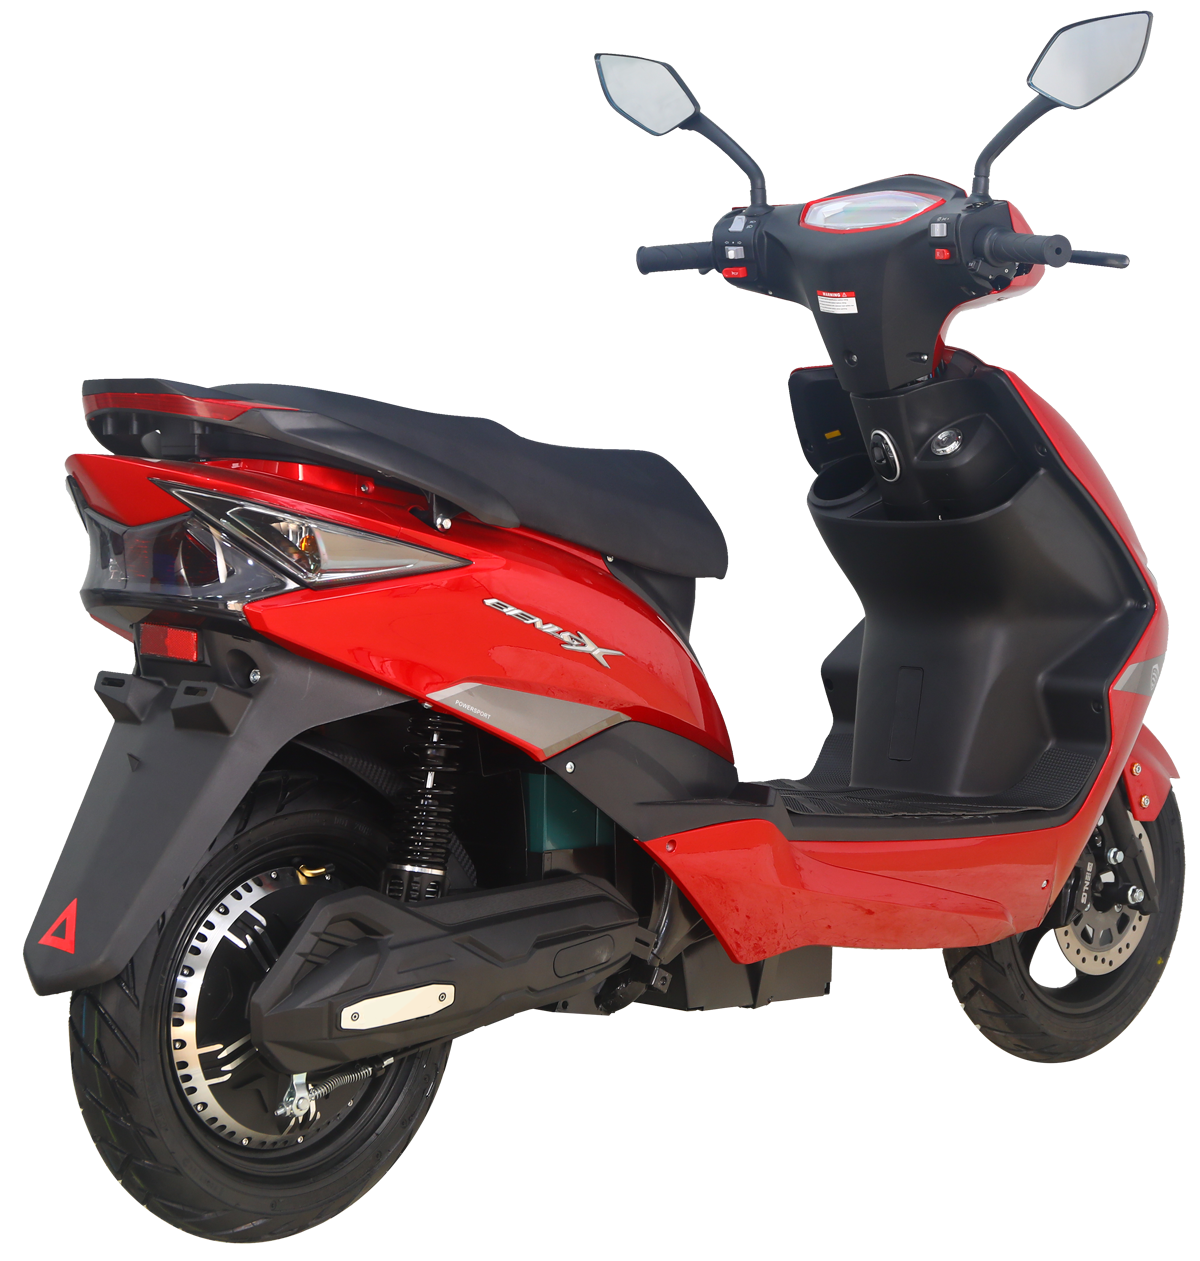 Supply Benlg 72V EAGLE 7 Electric moped 1500W 72V 20Ah cheap electric motorcycle scooter with high quality, Benlg 72V EAGLE 7 Electric moped 1500W 72V 20Ah cheap electric motorcycle scooter with high quality Factory Quotes, Benlg 72V EAGLE 7 Electric moped 1500W 72V 20Ah cheap electric motorcycle scooter with high quality Producers